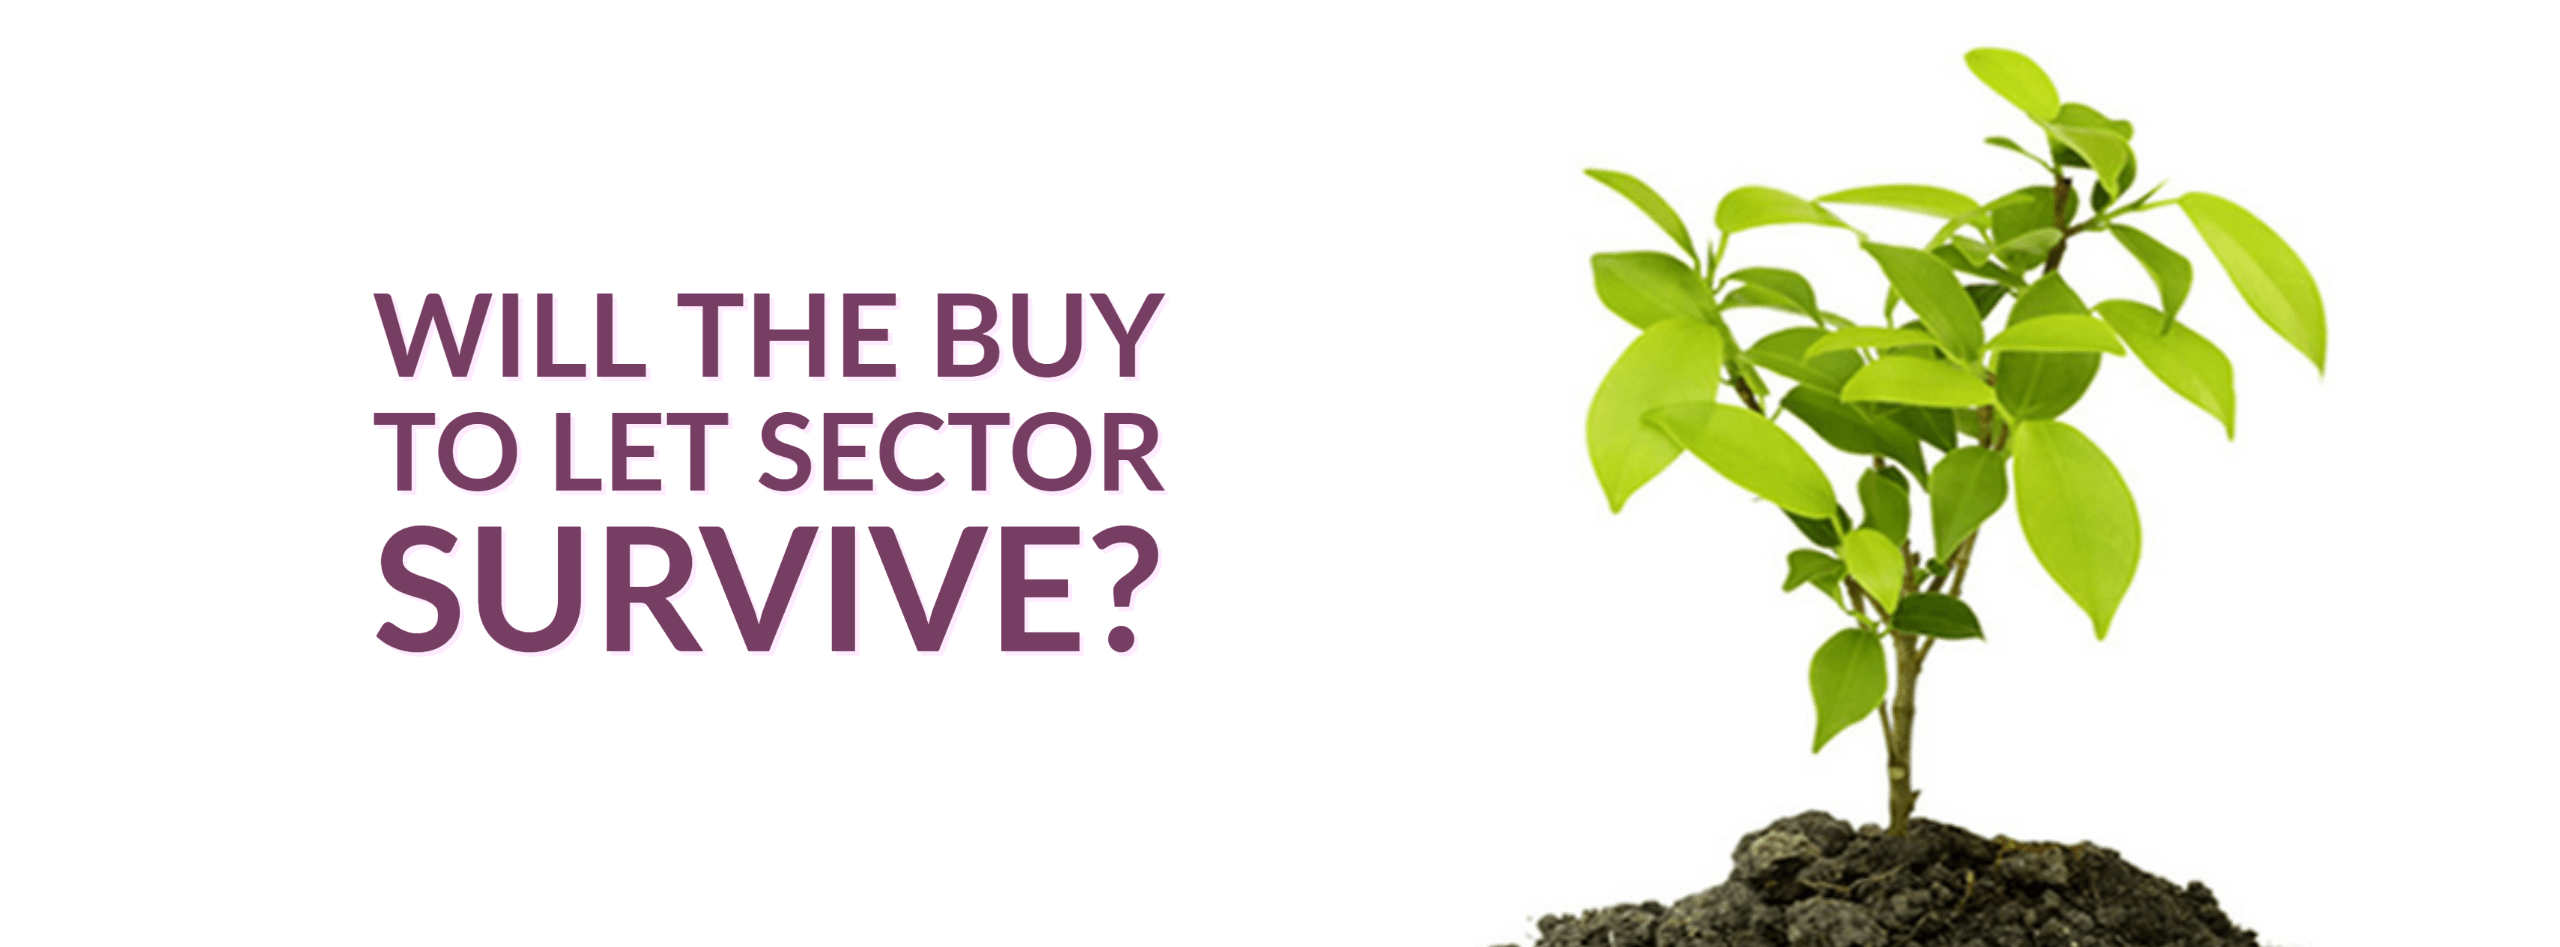 Will The Buy to Let Sector Survive?